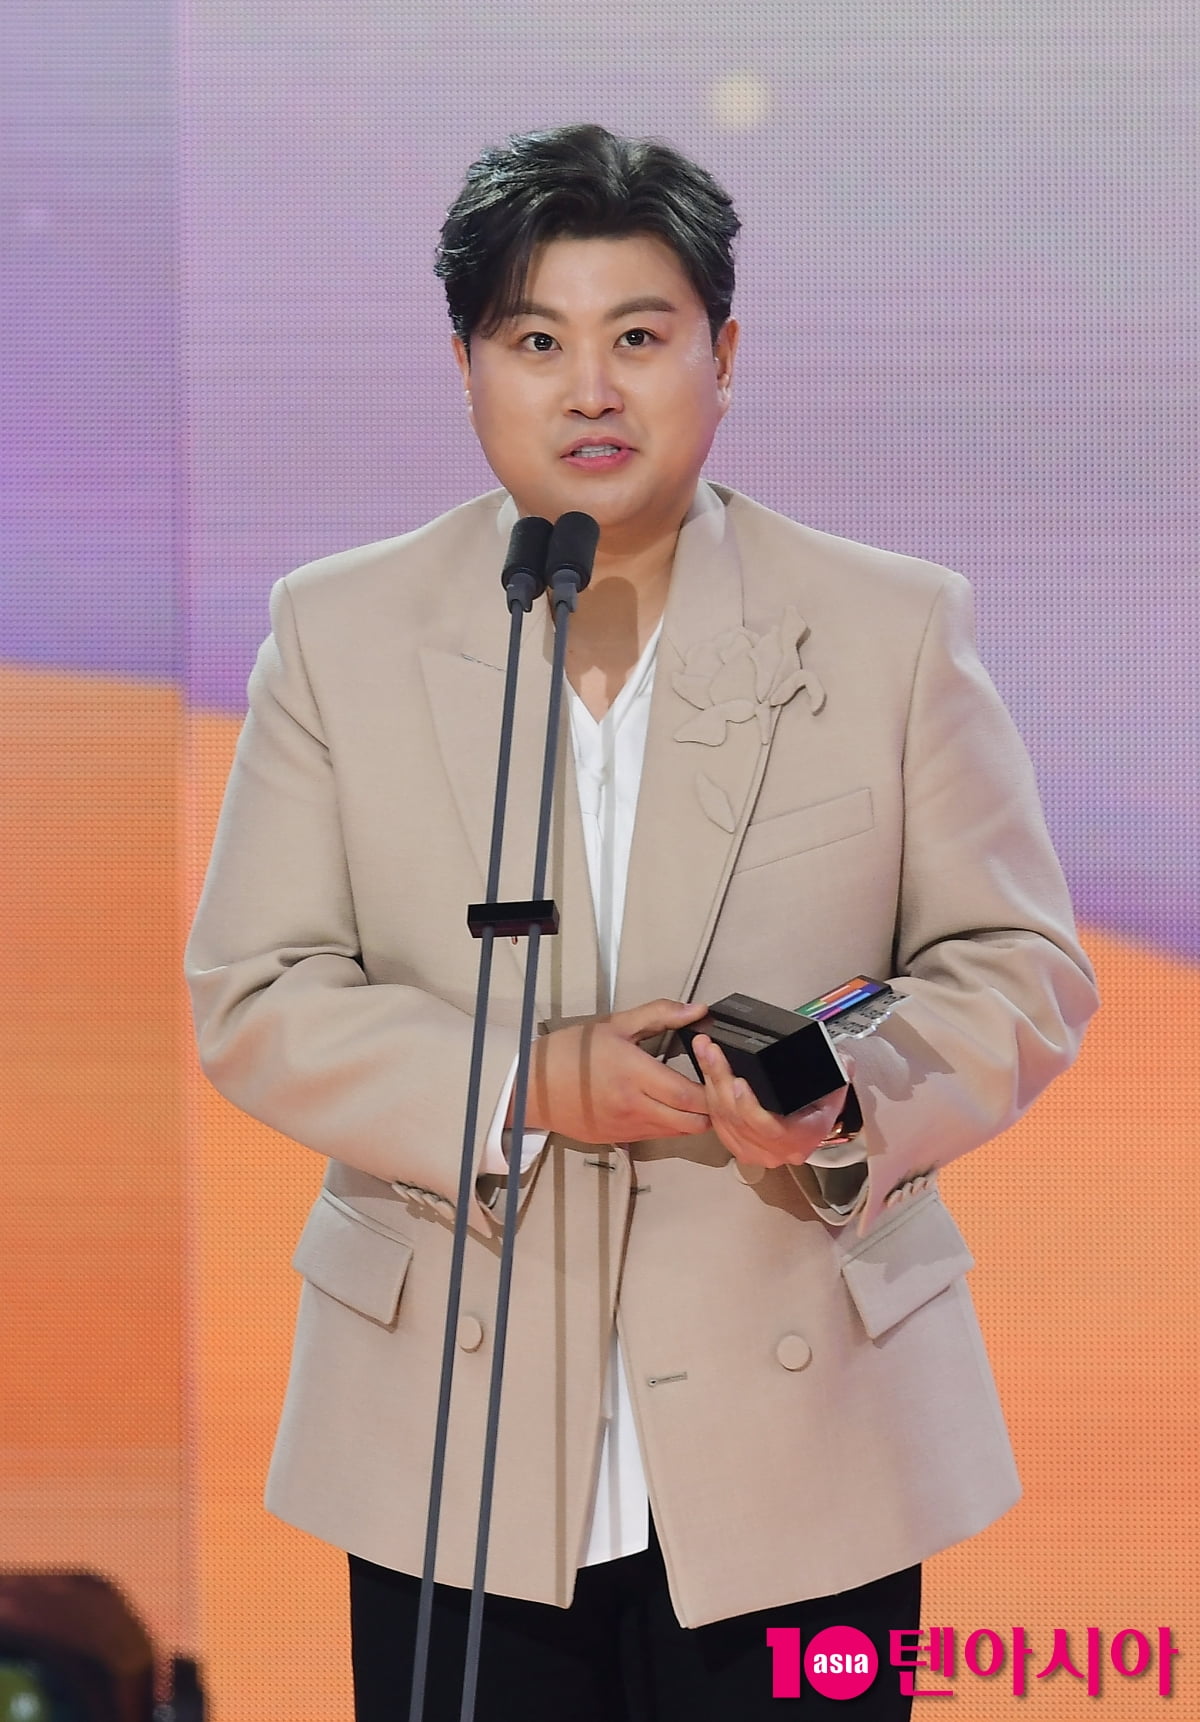 Kim Ho-jung, The will to push ahead with the Changwon concert is ‘firm’